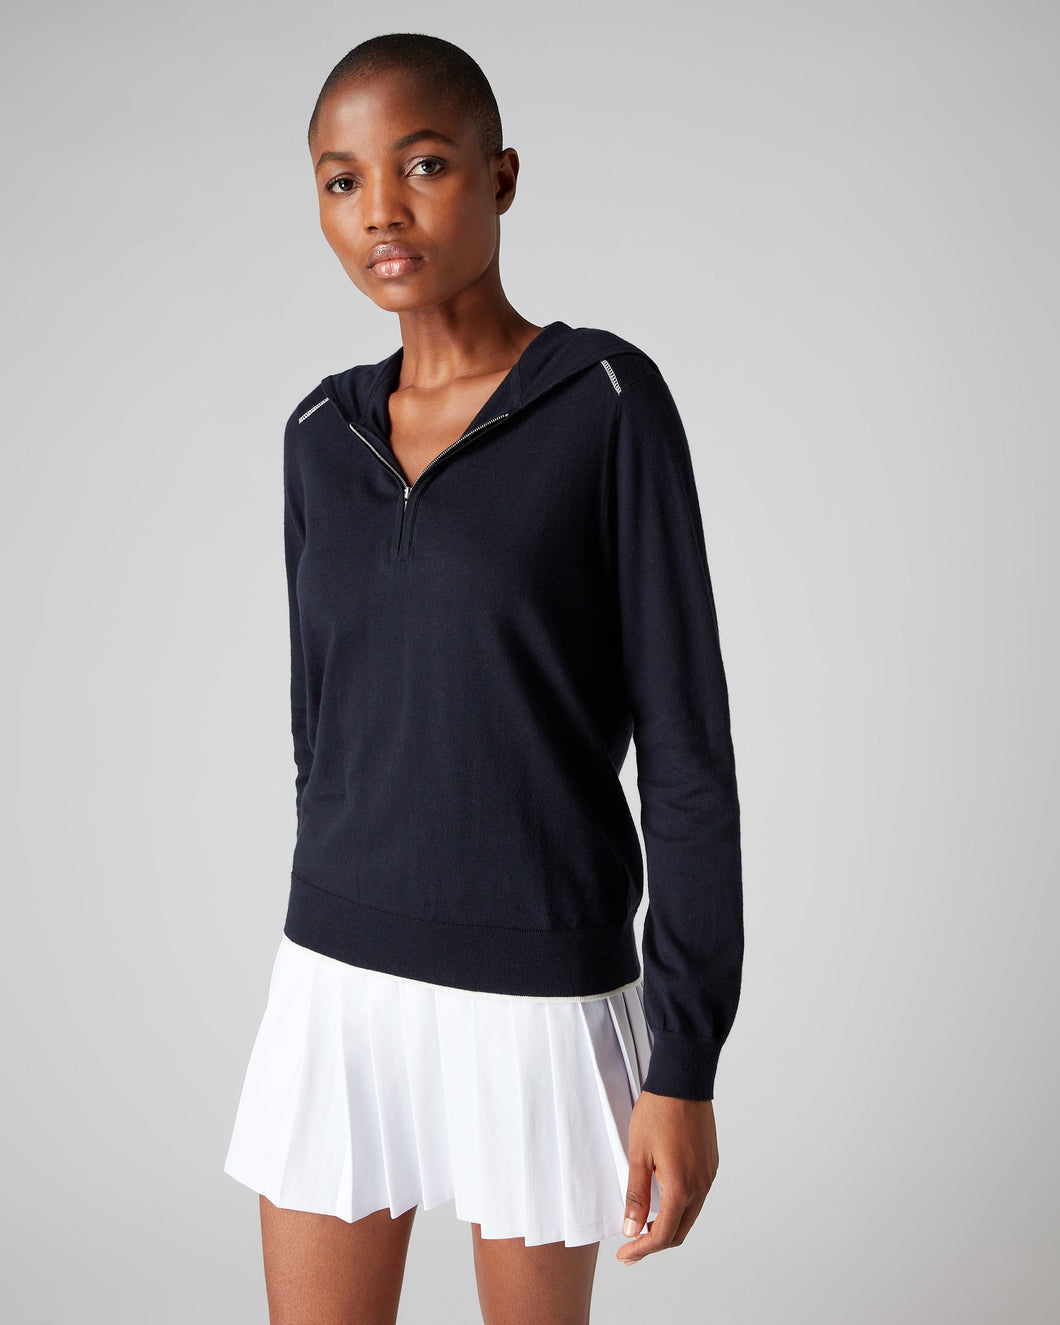 N.Peal Women's Cotton Cashmere Hoodie Navy Blue